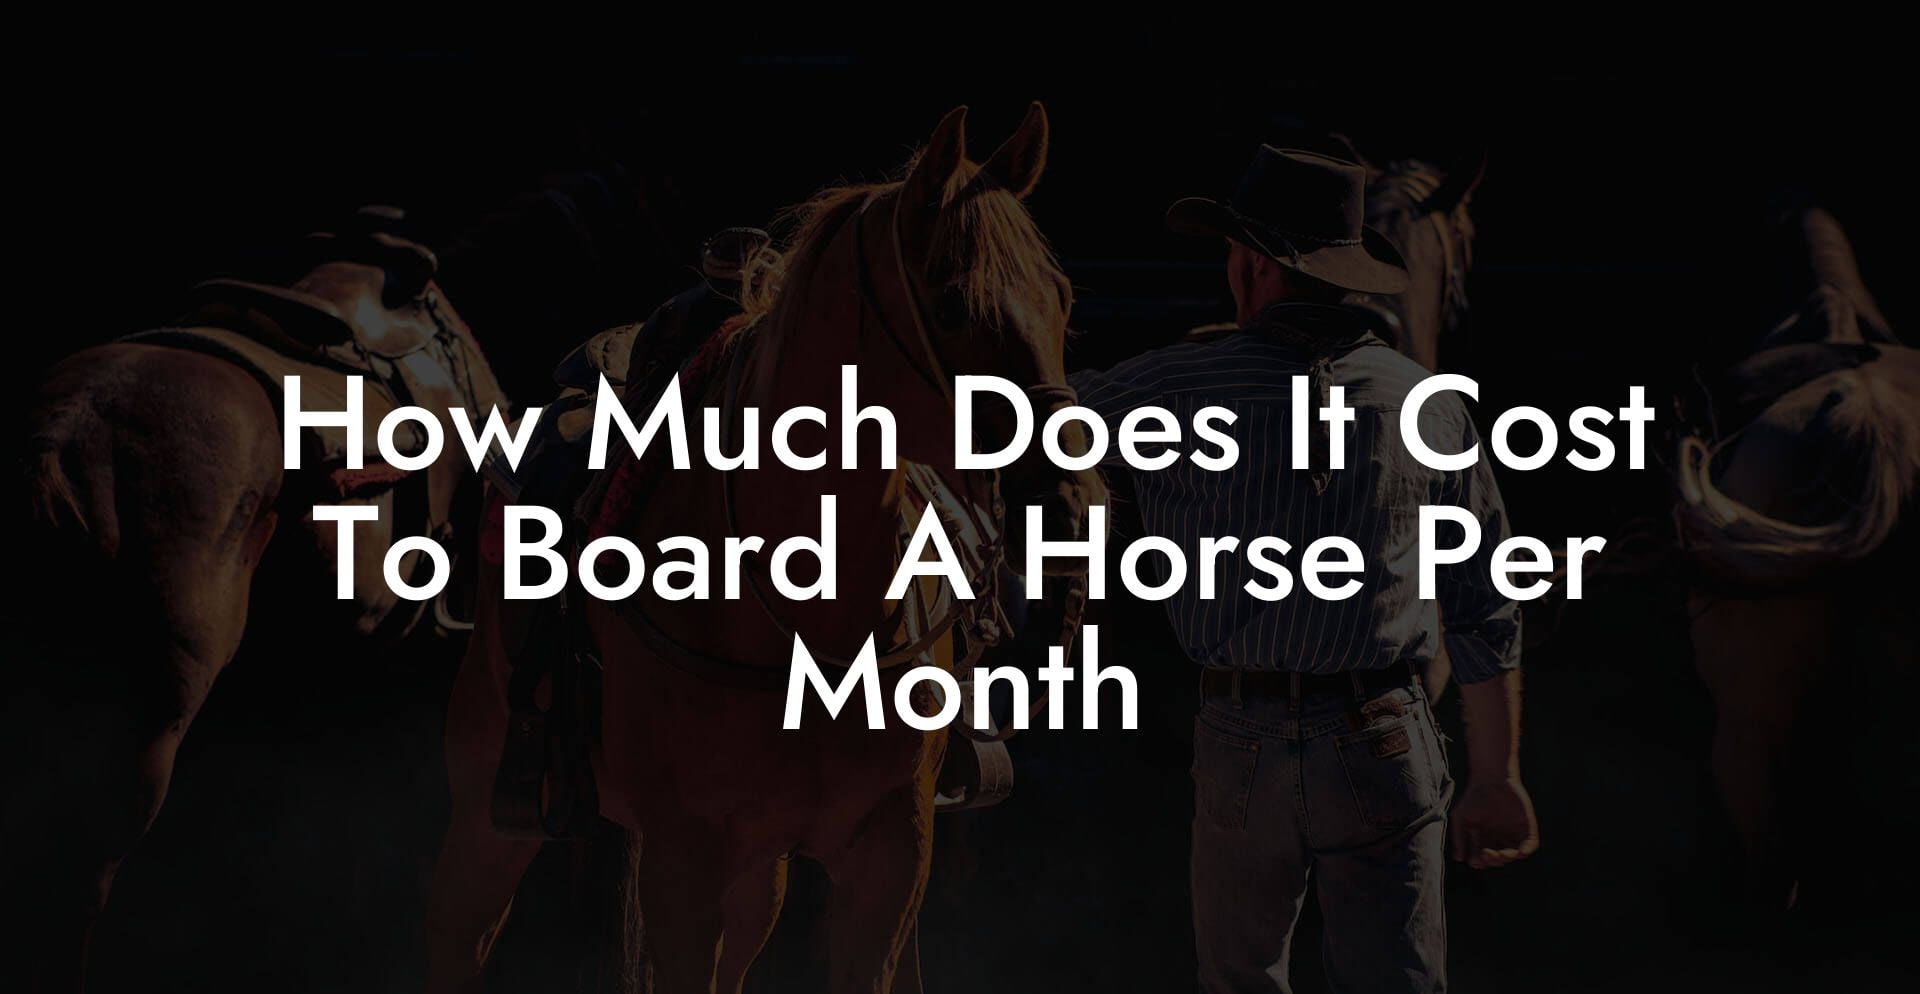 How Much Does It Cost To Board A Horse Per Month